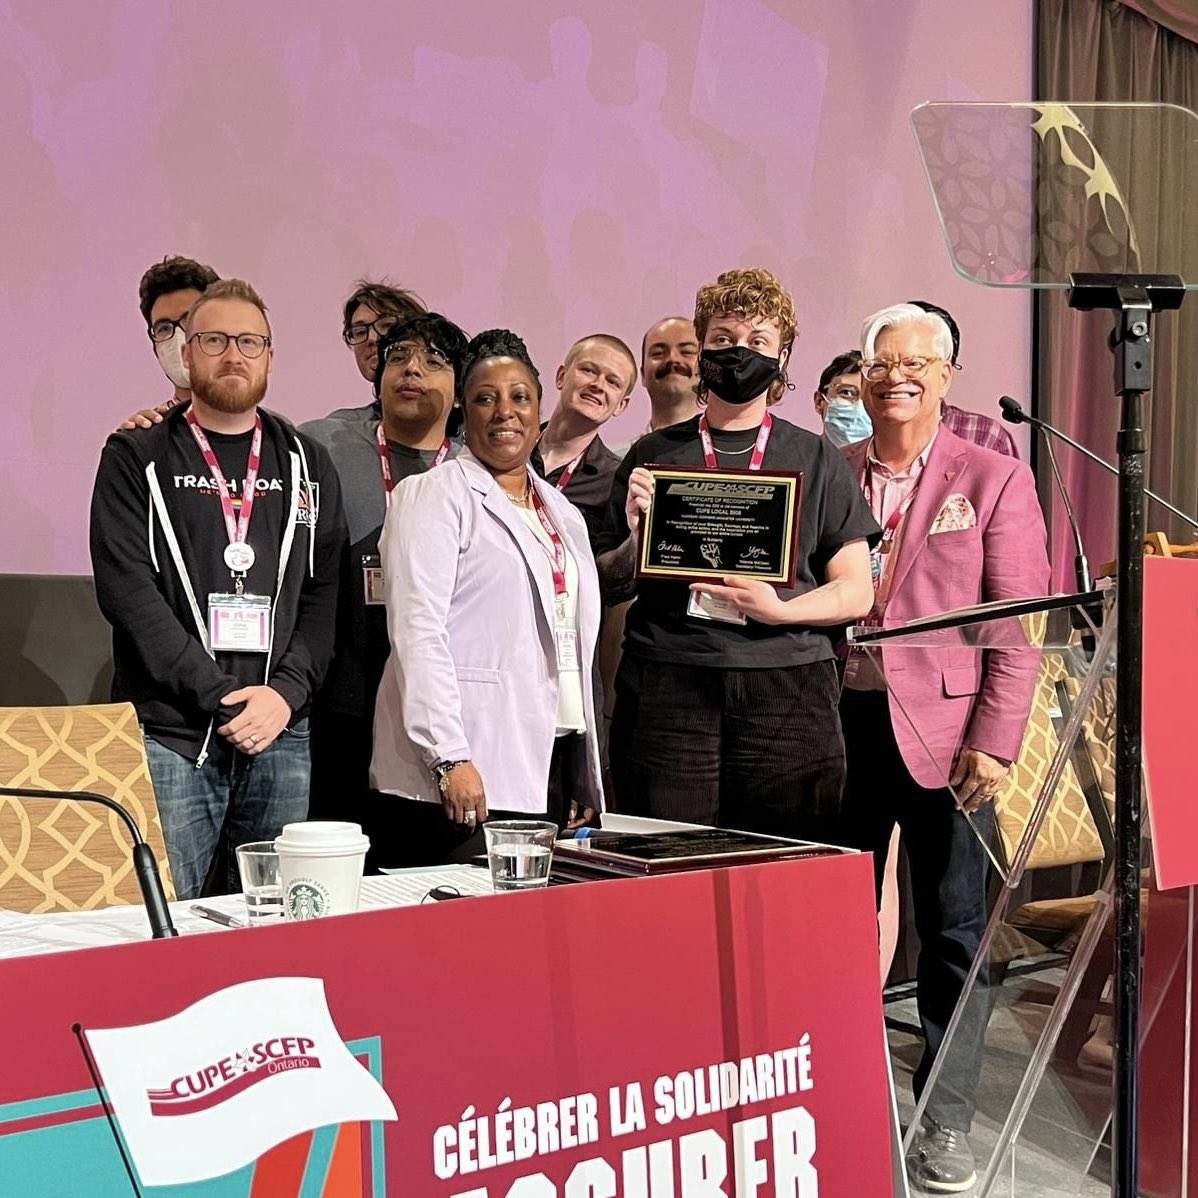 Really special to be honoured by @CUPEOntario at #CUPEON23 for our @cupe_3906 strike at @McMasterU last fall. The strike is the most powerful weapon we have to fight, not just for better workplaces, but for a better world. So many amazing unionists proved it this past year.